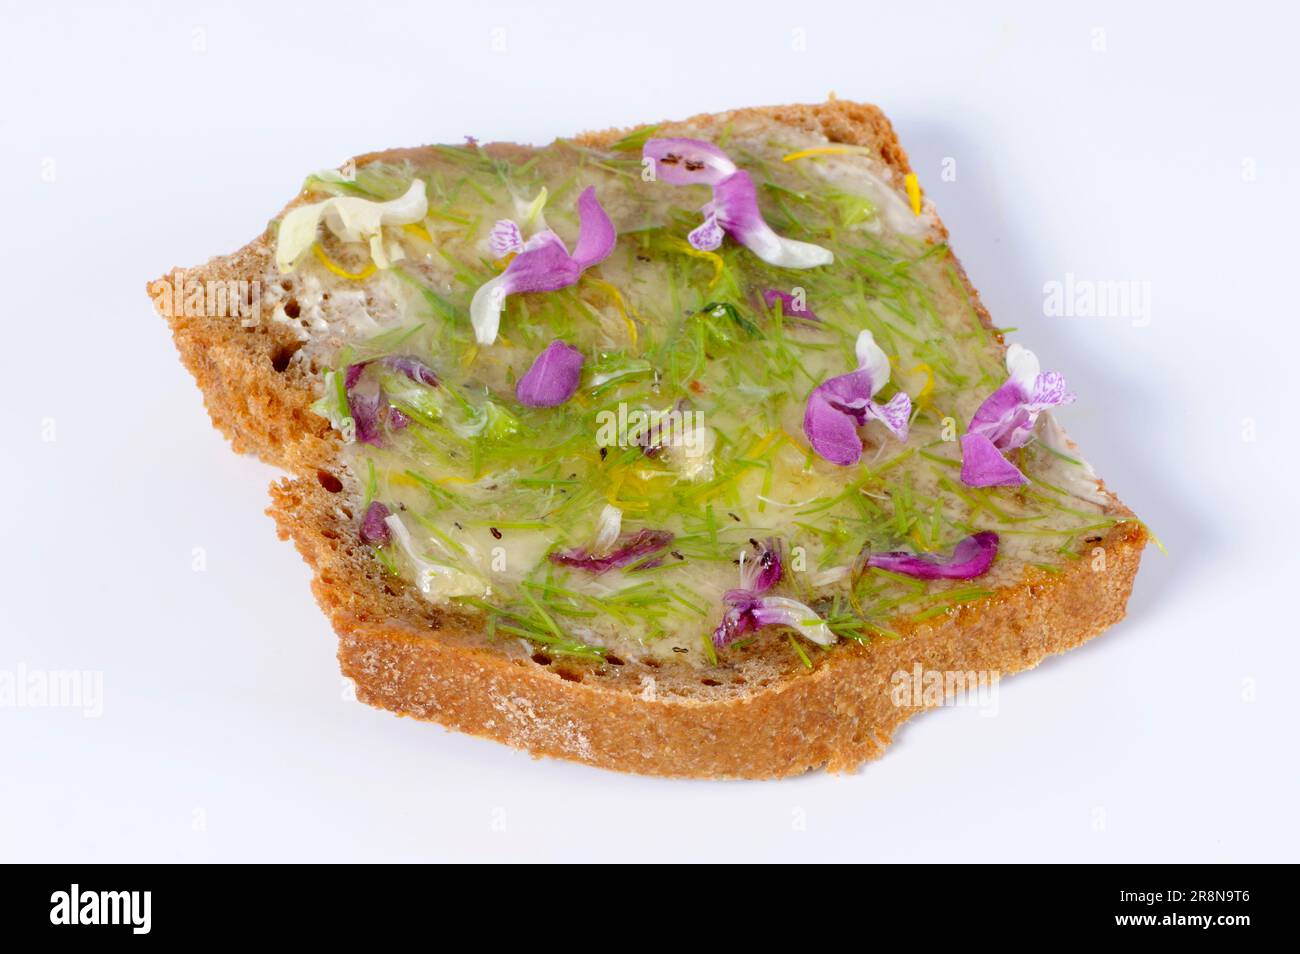 Slice of bread with flower honey, common spruce (Picea abies), fresh tips, loosestrife flowers, spotted (Lamium maculatum) dead-nettle flowers, white Stock Photo